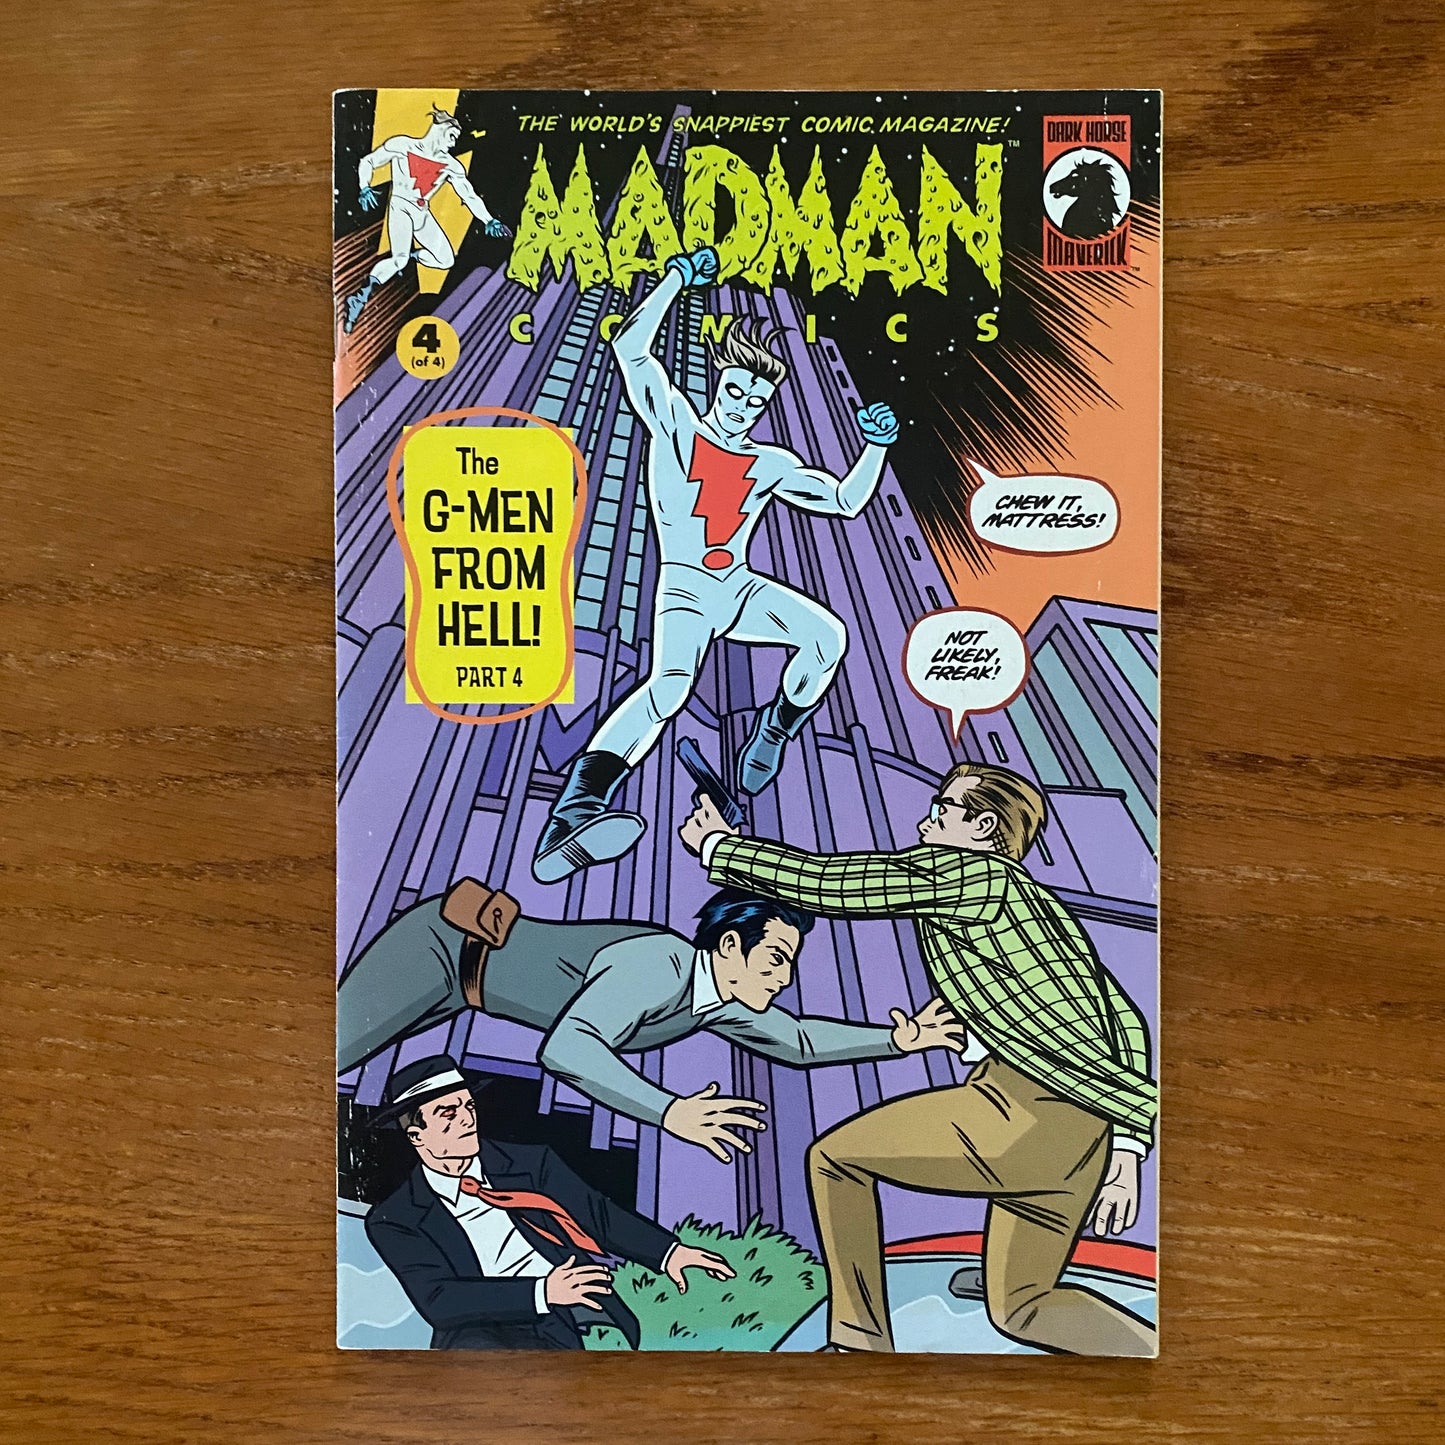 Madman: G Men From Hell 1-4 - Mike Allread